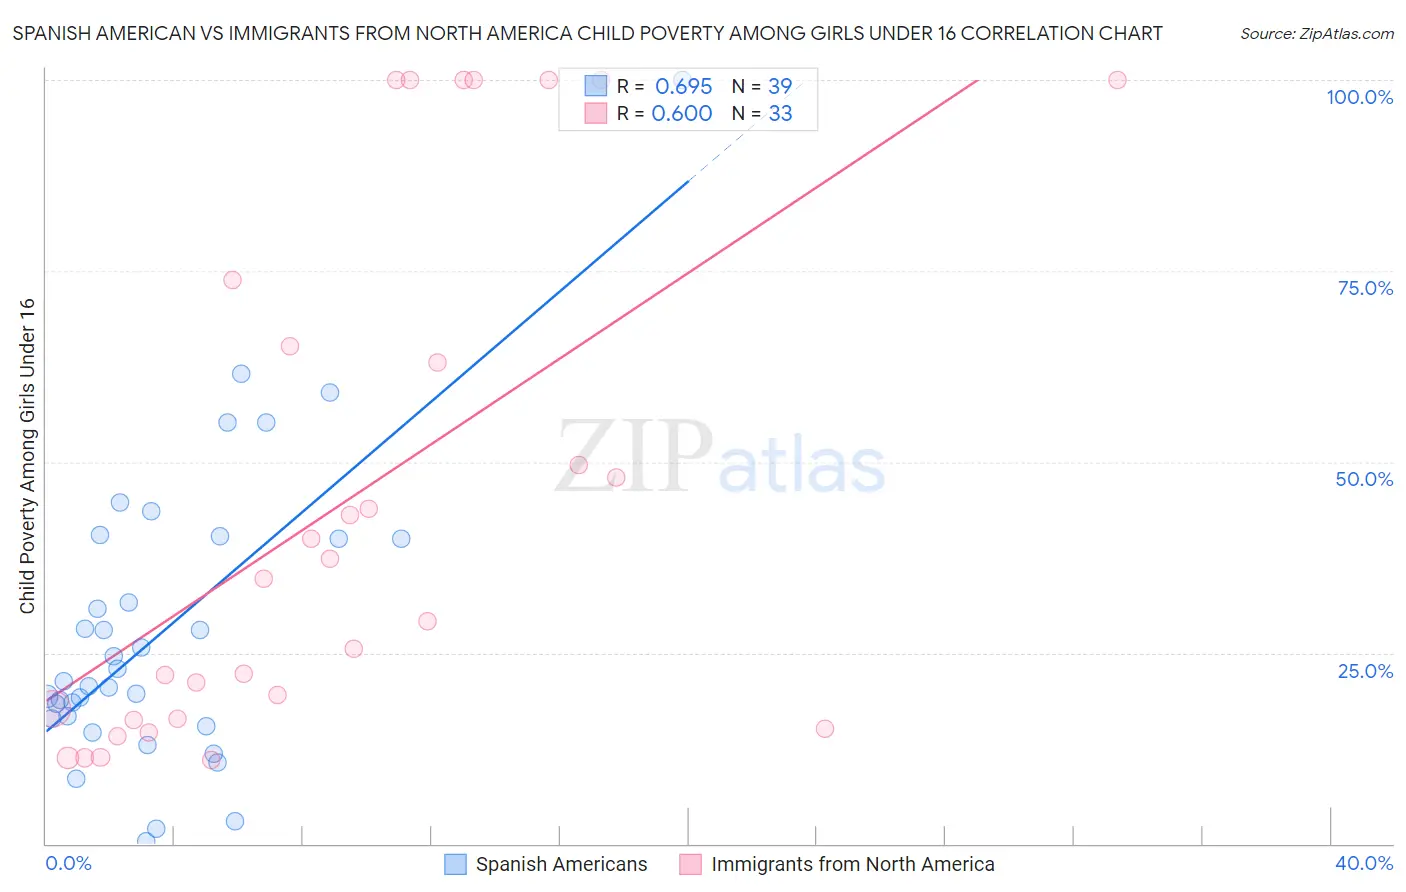 Spanish American vs Immigrants from North America Child Poverty Among Girls Under 16